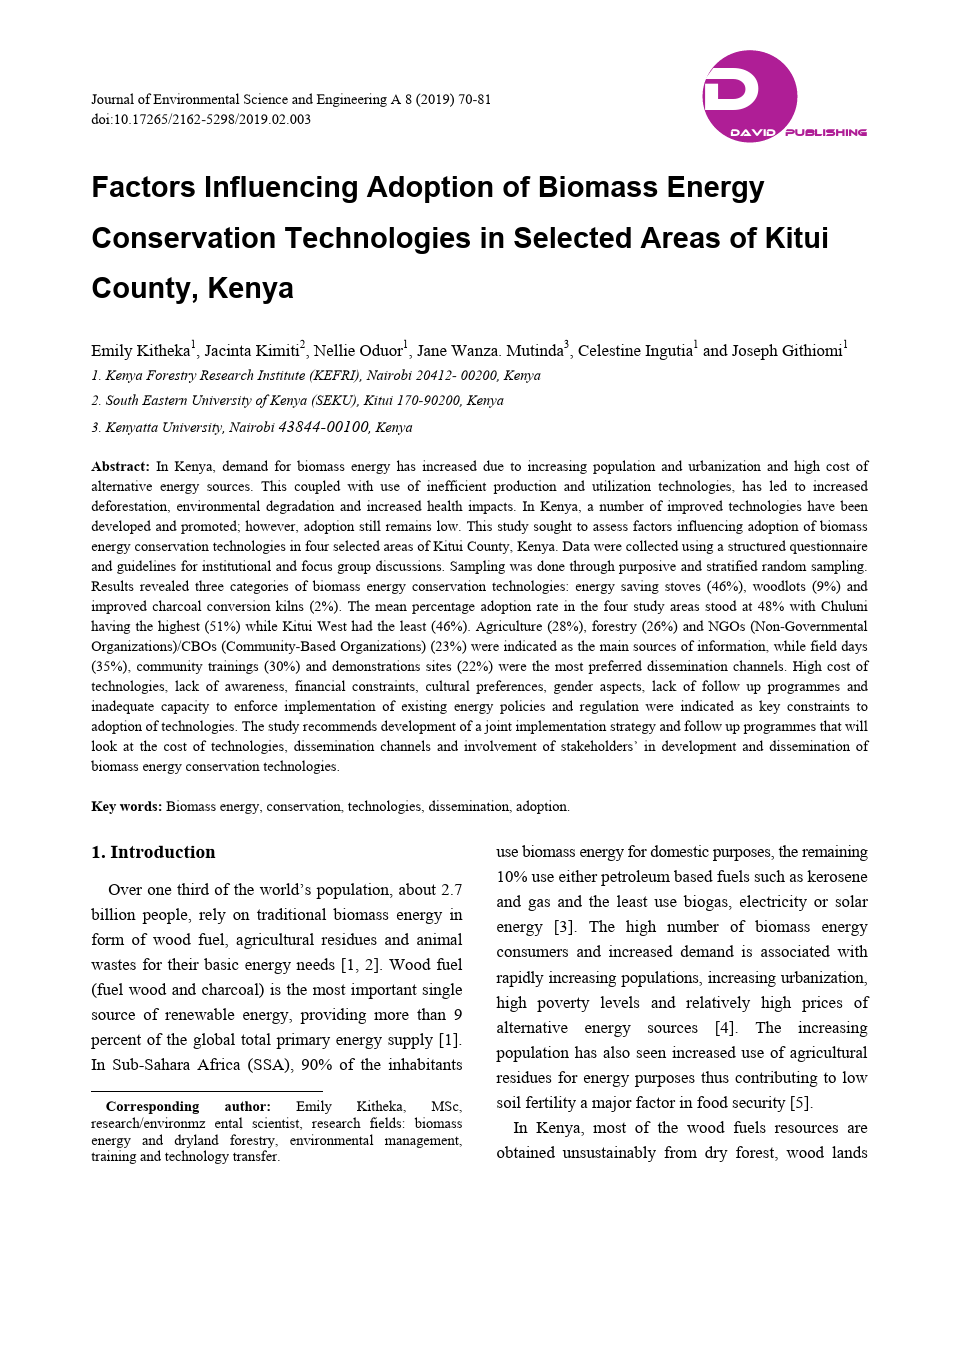 Factors Influencing Adoption of Biomass Energy Conservation Technologies in Selected Areas